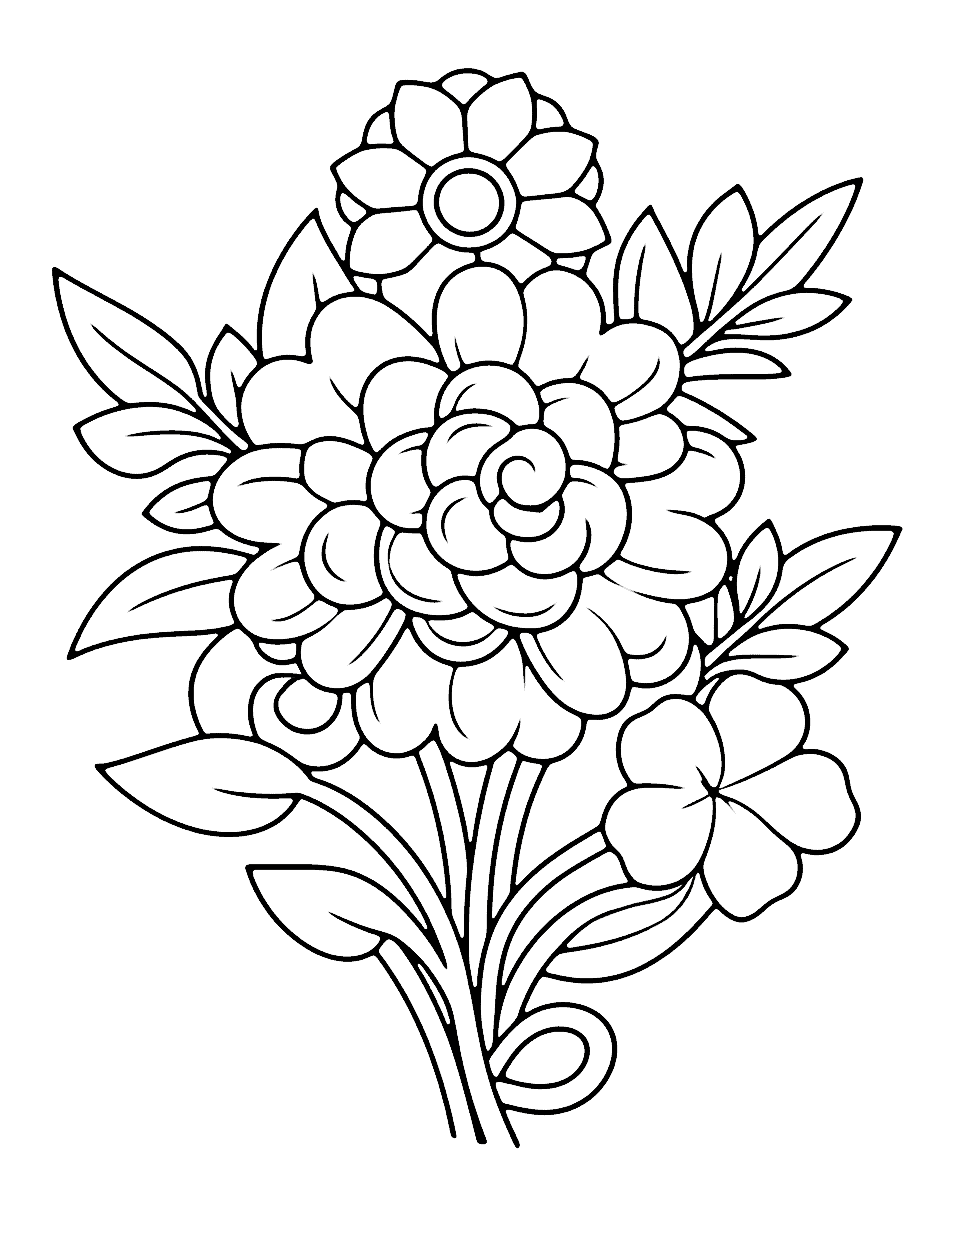 Simple Spring Blooms Flower Coloring Page - A simple, large flower design filled with spring blooms.